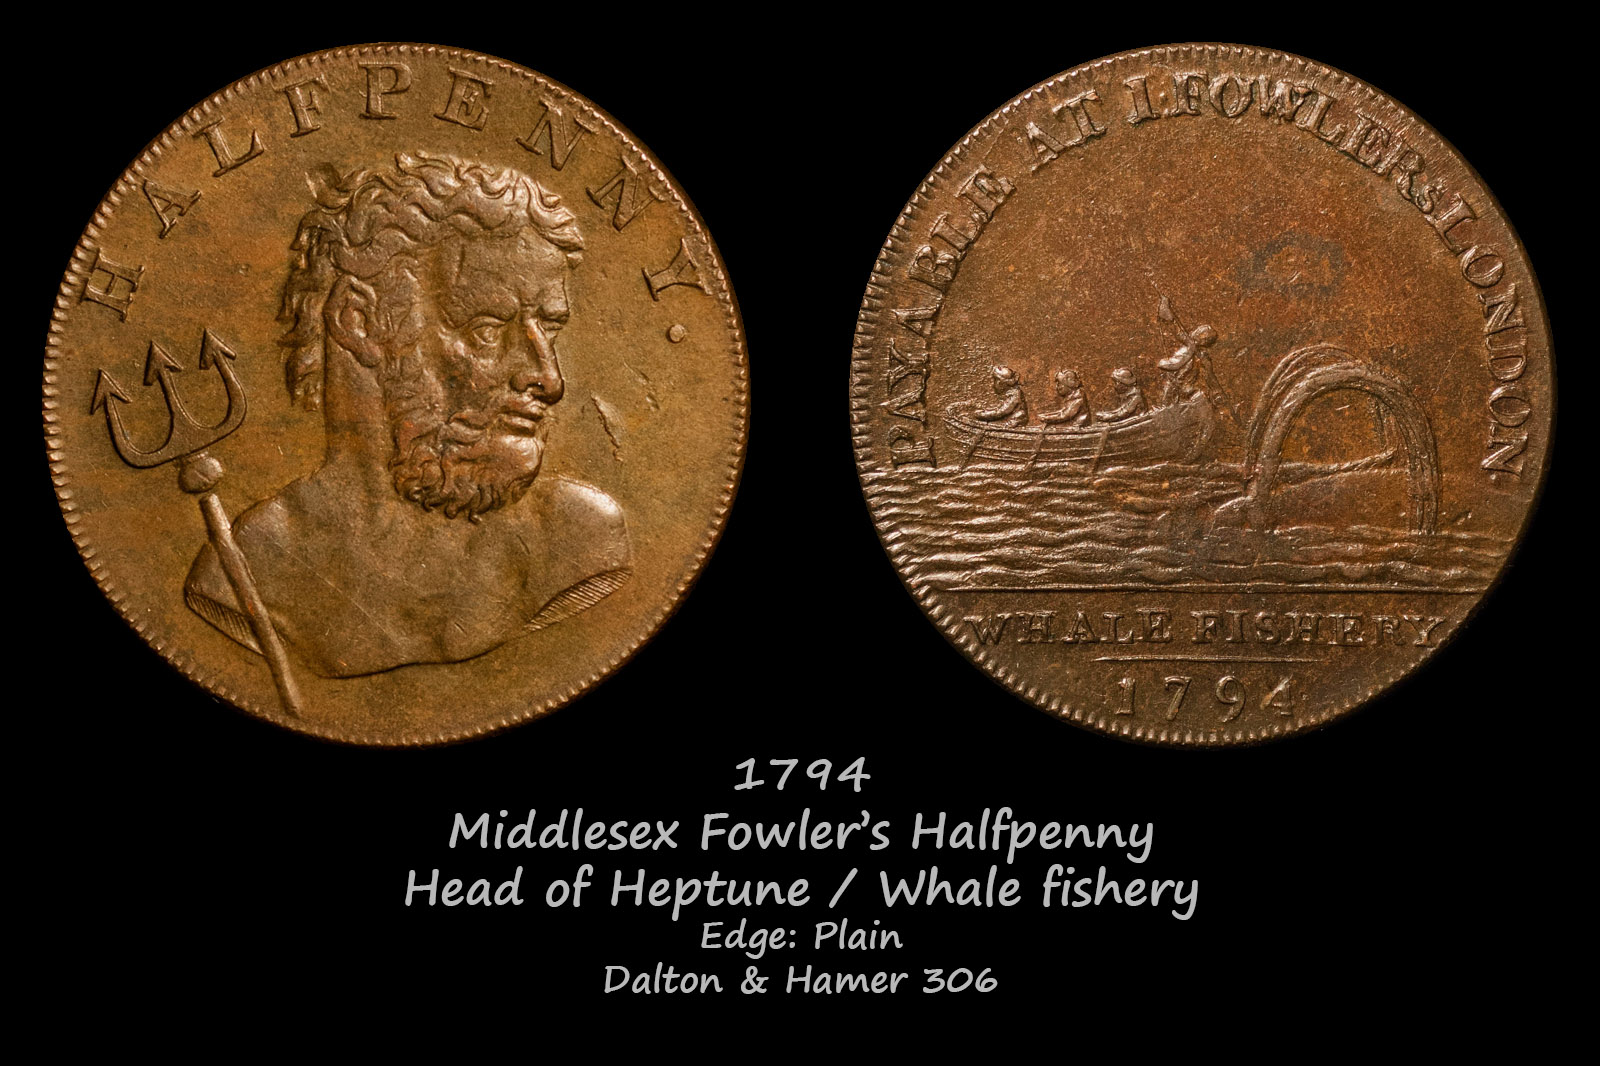 Middlesex Fowler's Halfpenny D&H306